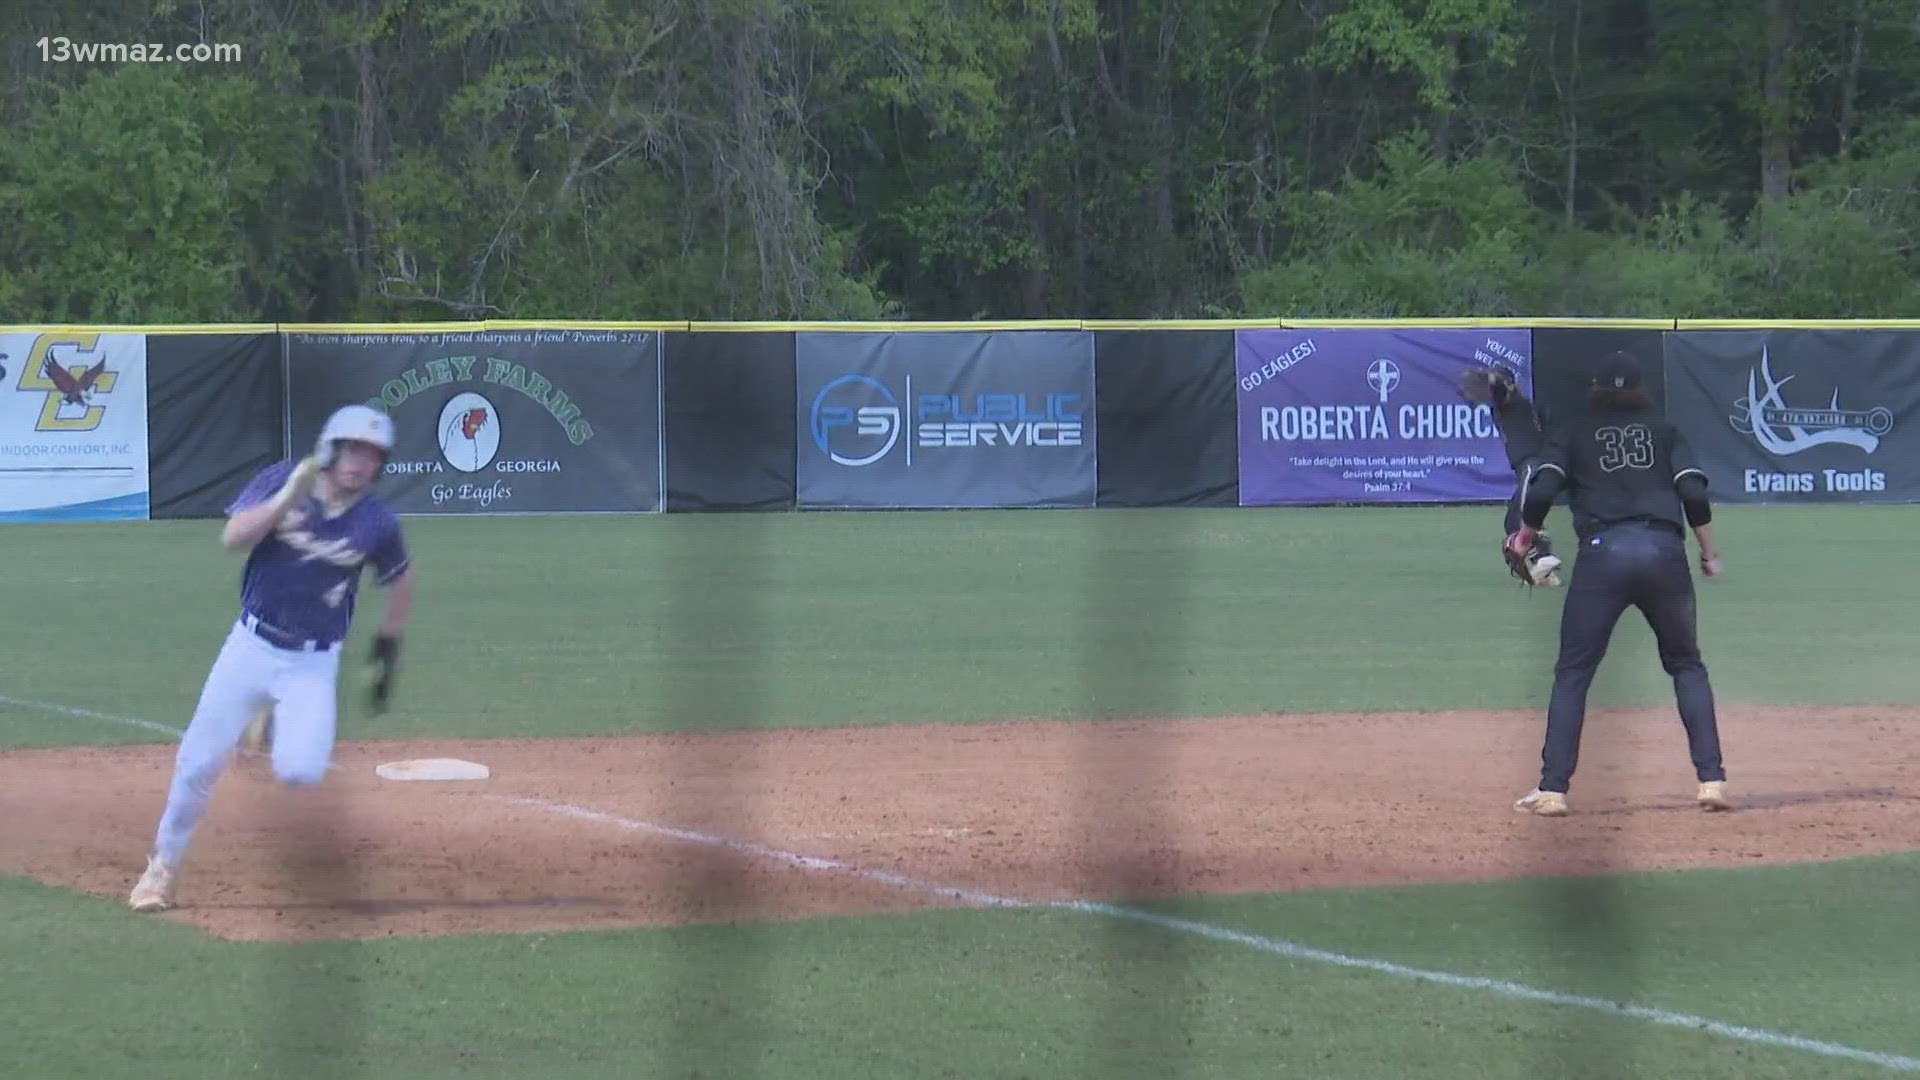 Take a look at your Crawford County baseball highlights as they take on Flint River